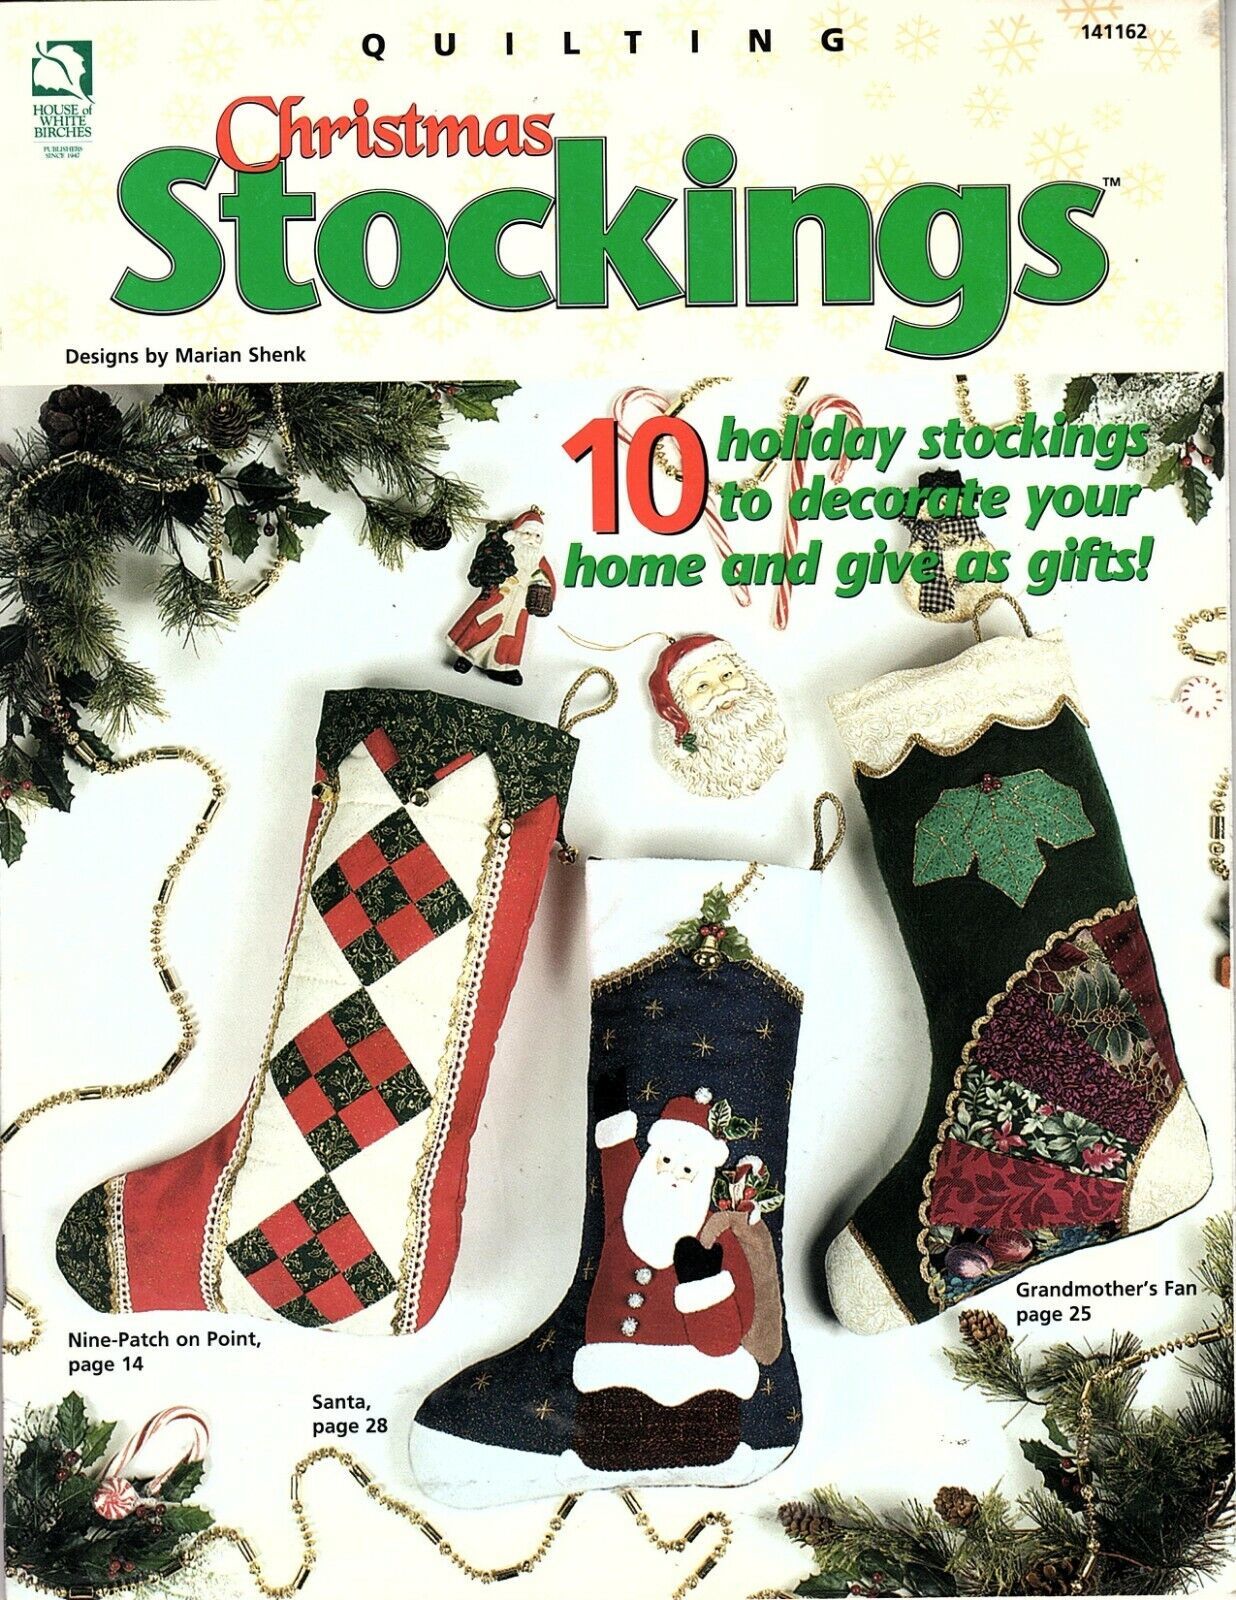 House of White Birches Quilting  Christmas Stockings 10 Holiday Patterns - $6.35